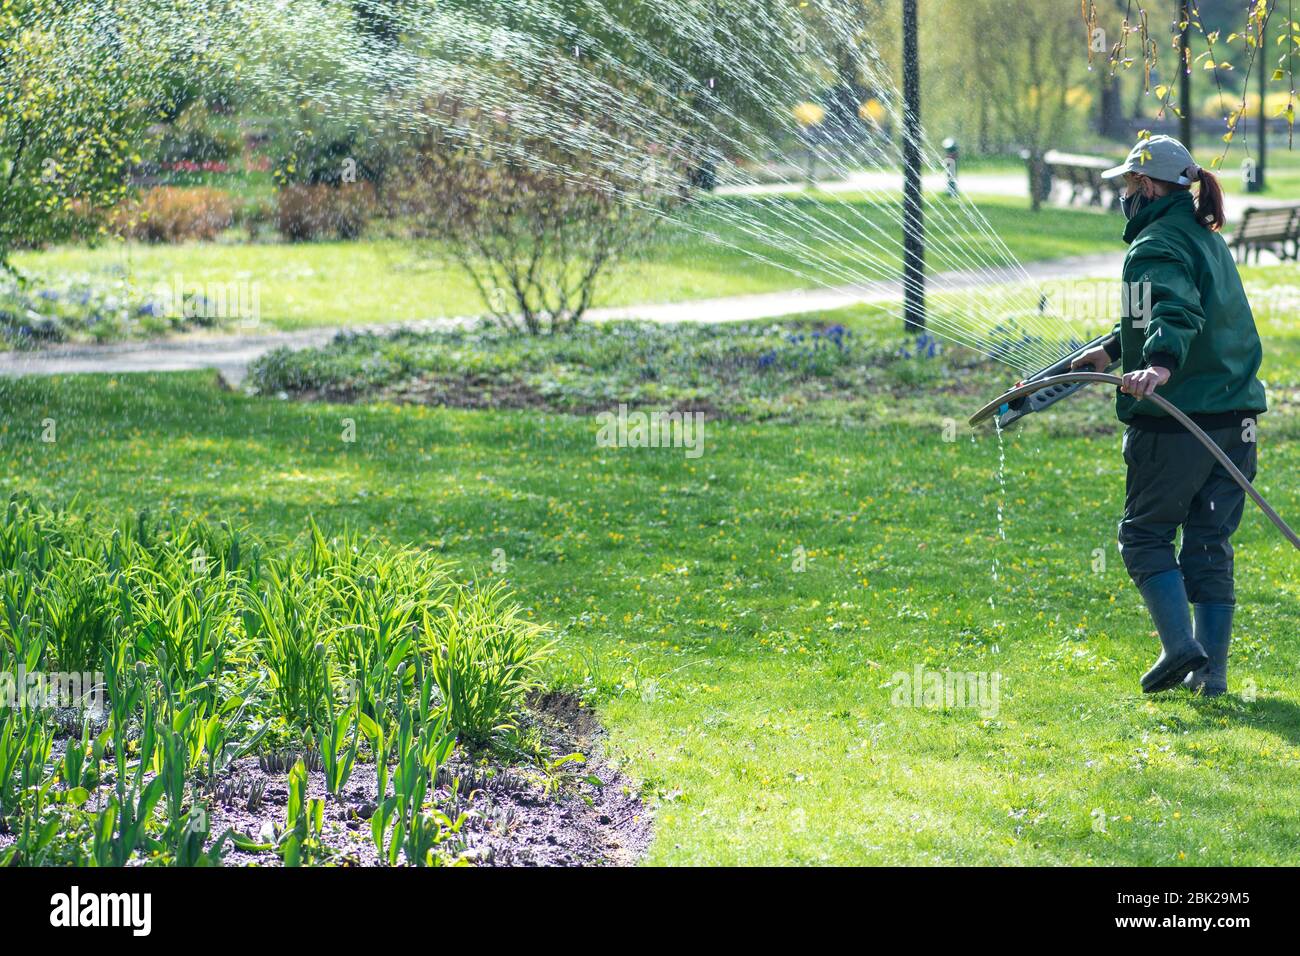 Girl watering flowers with an automatic irrigation system equipment garden watering tool Stock Photo